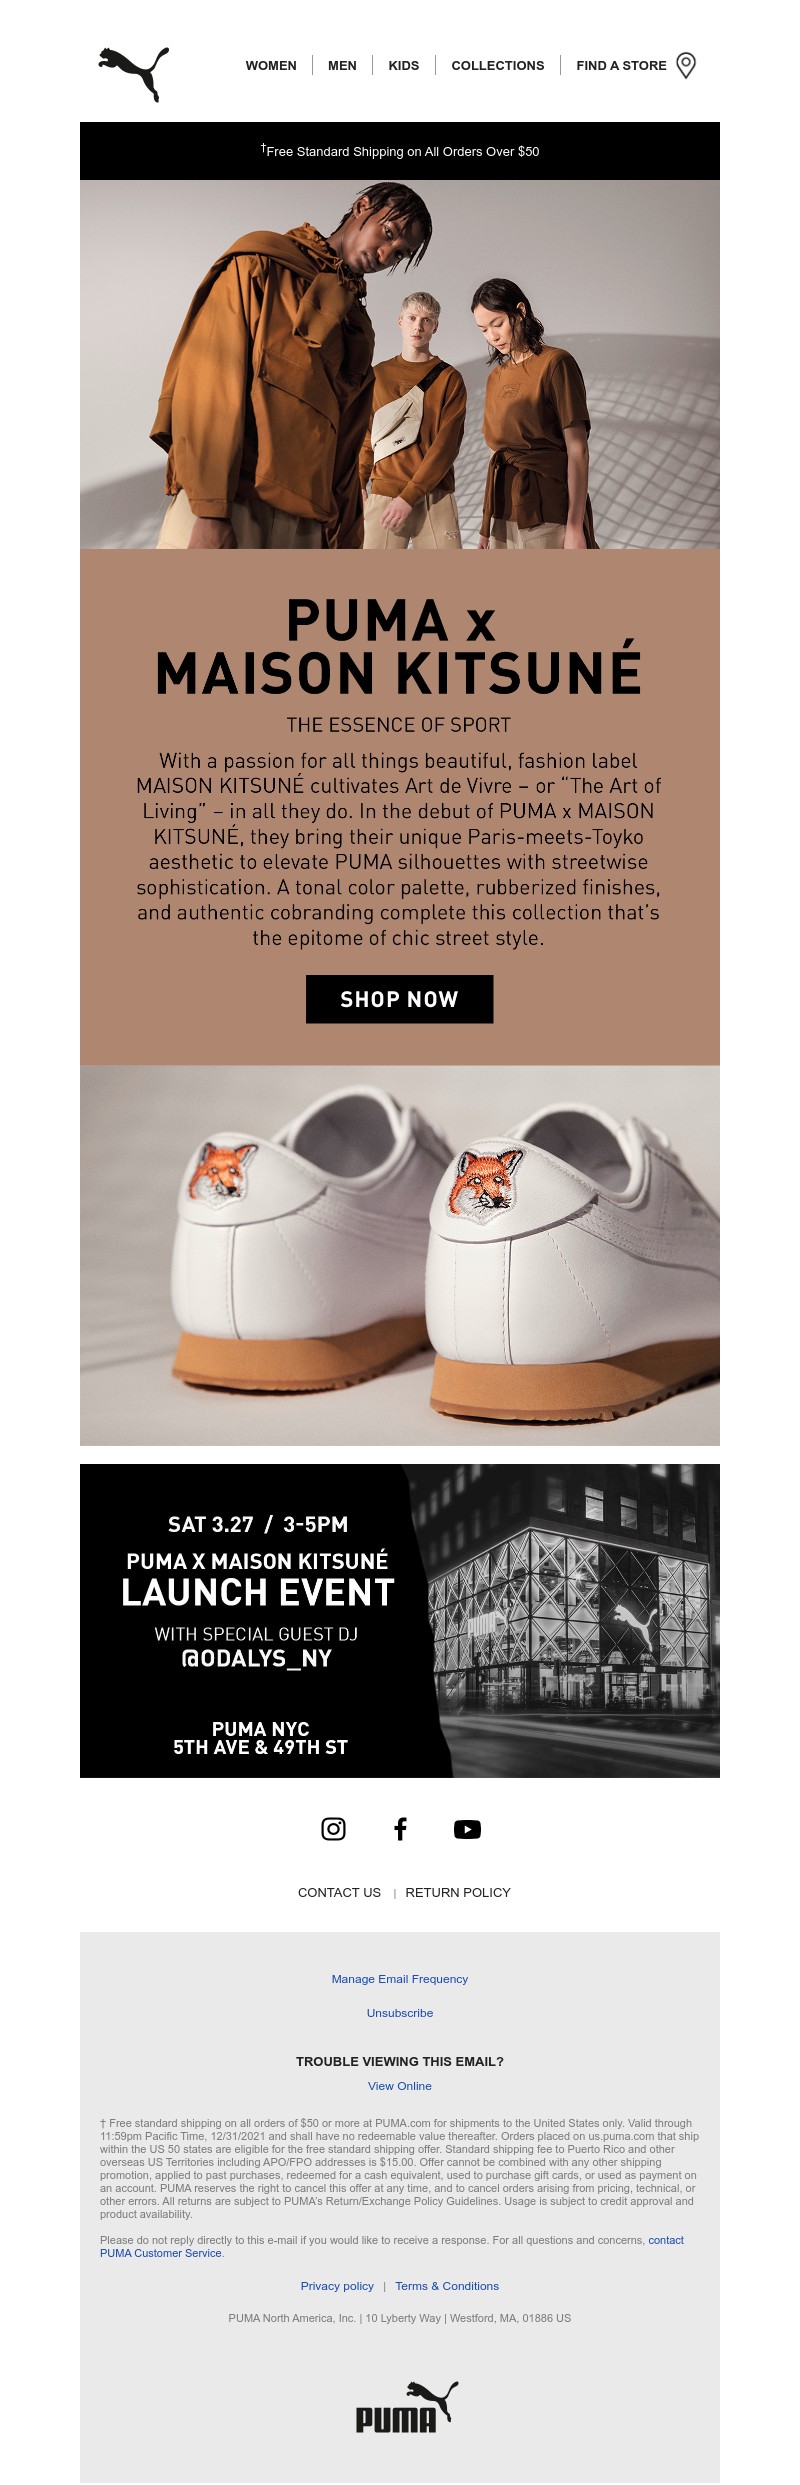 Email sent Puma to a subscriber